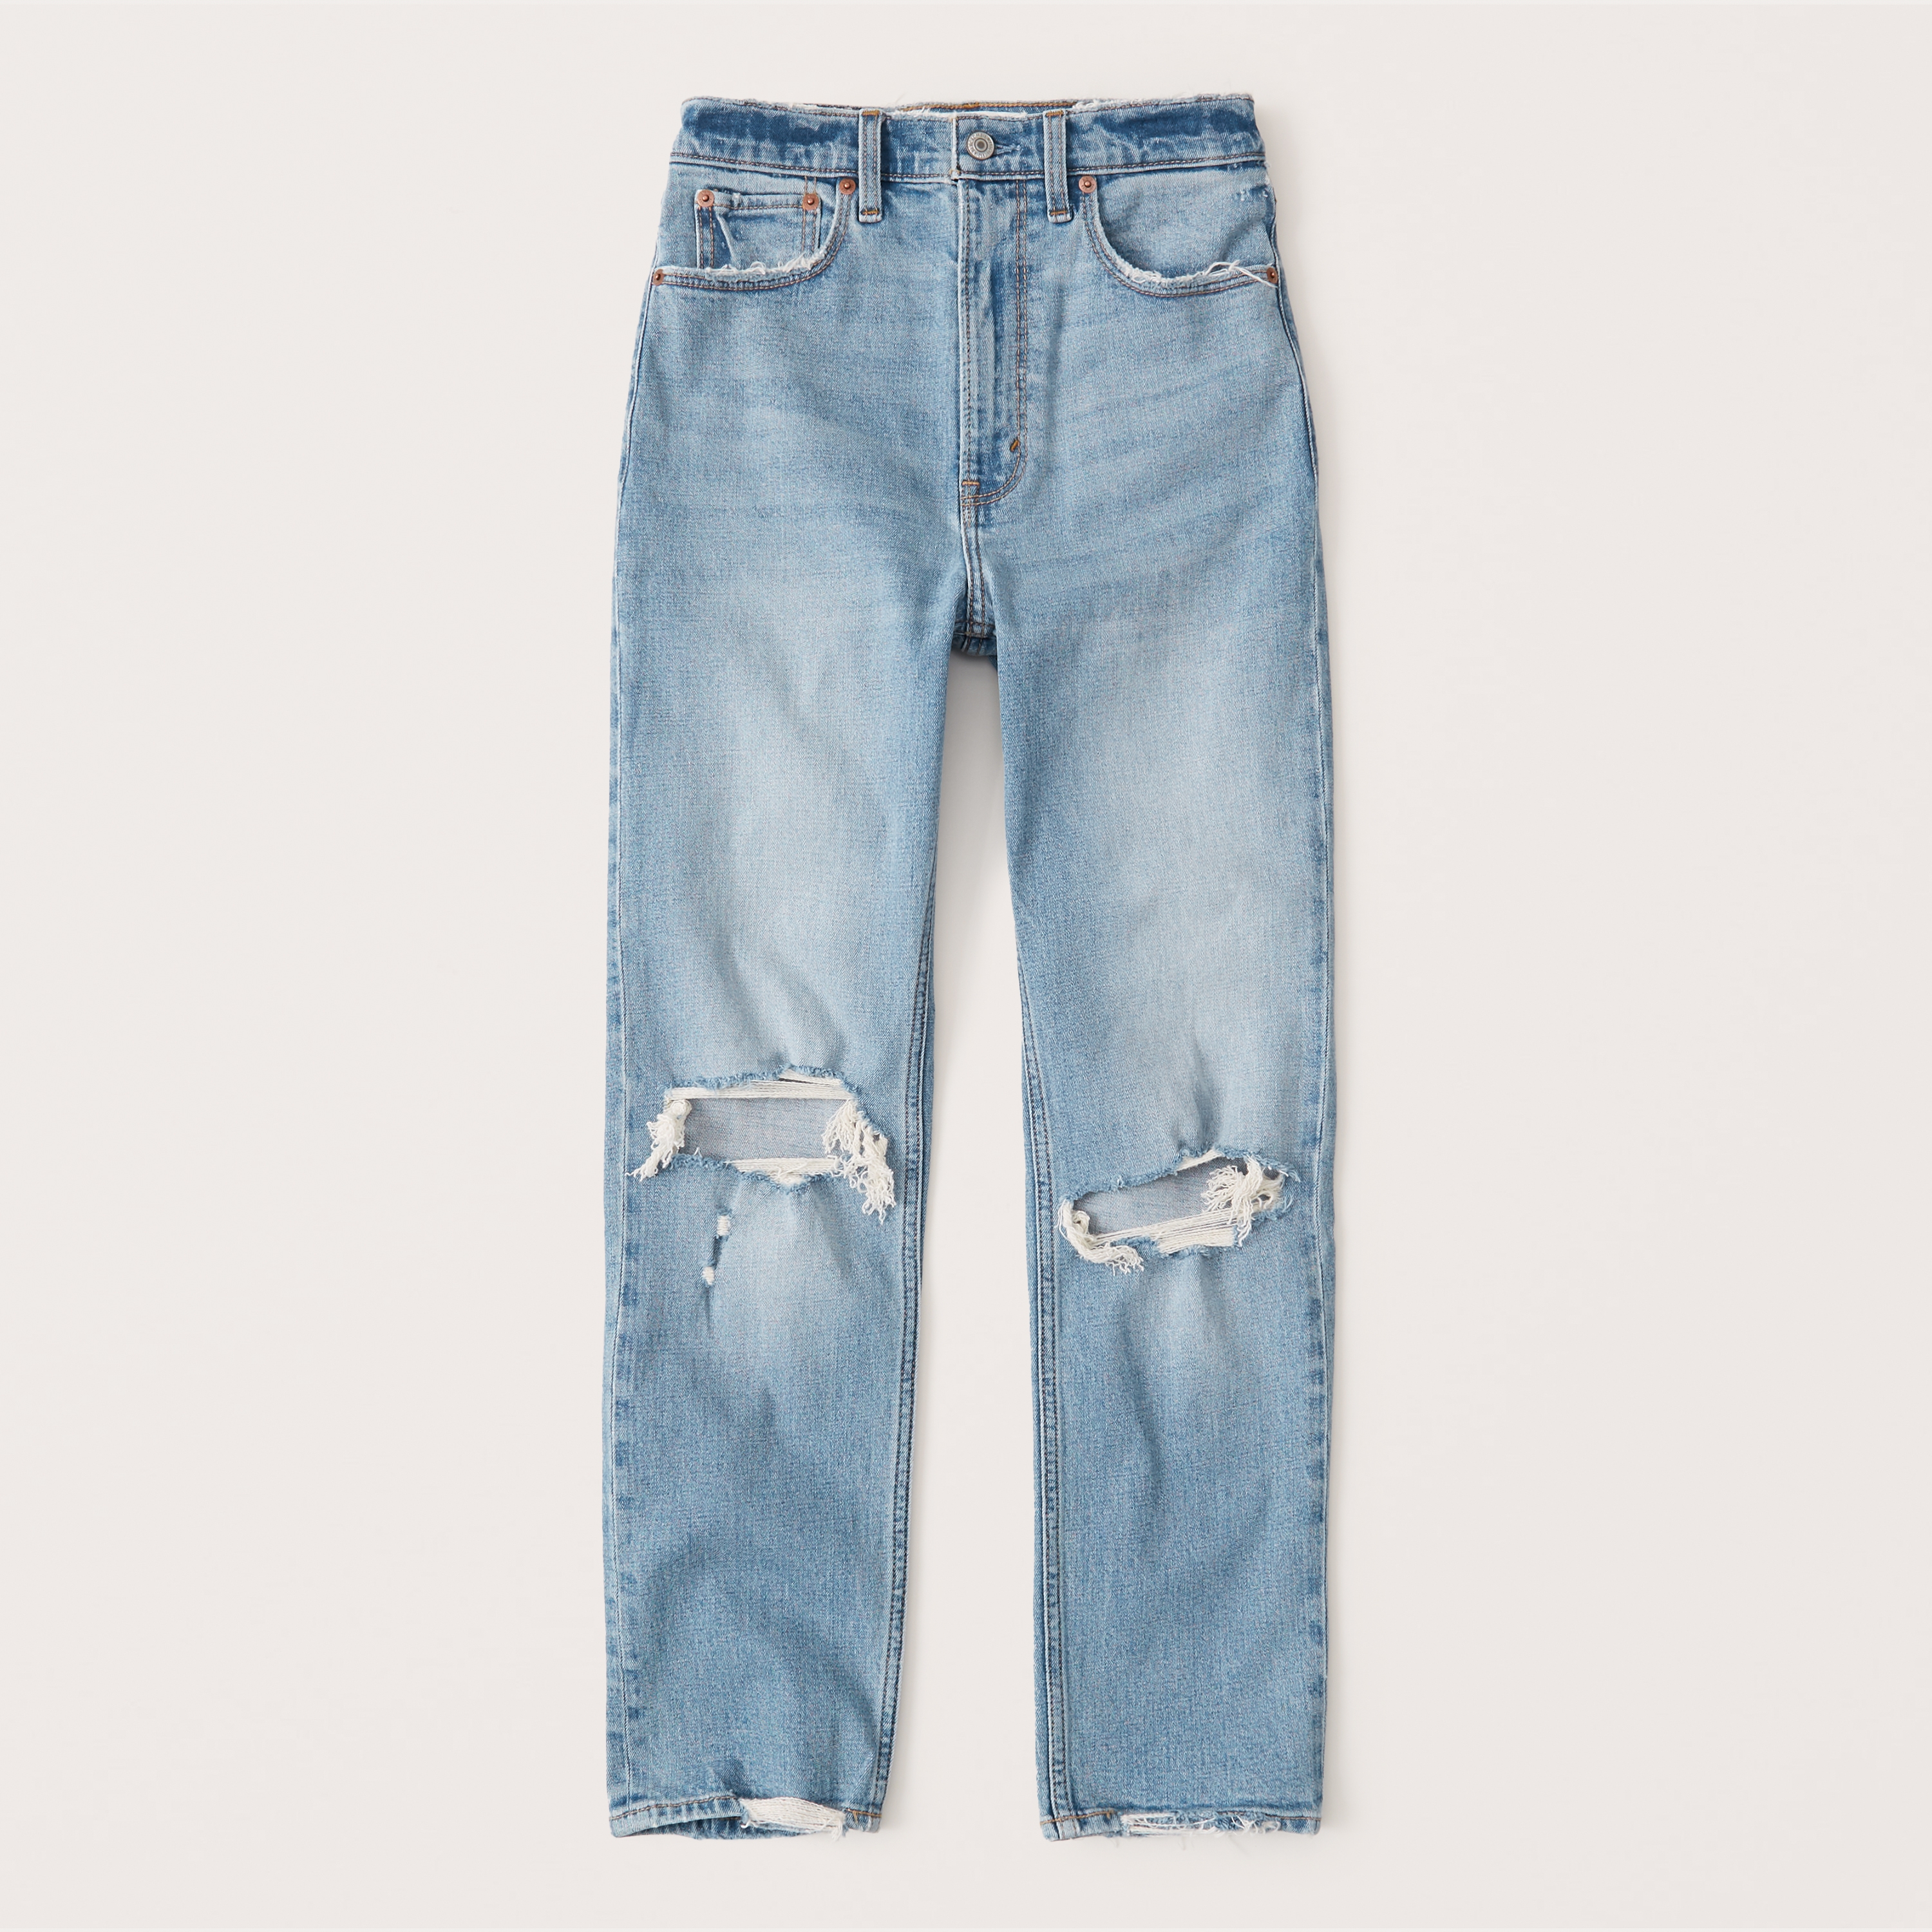 abercrombie & fitch ankle length